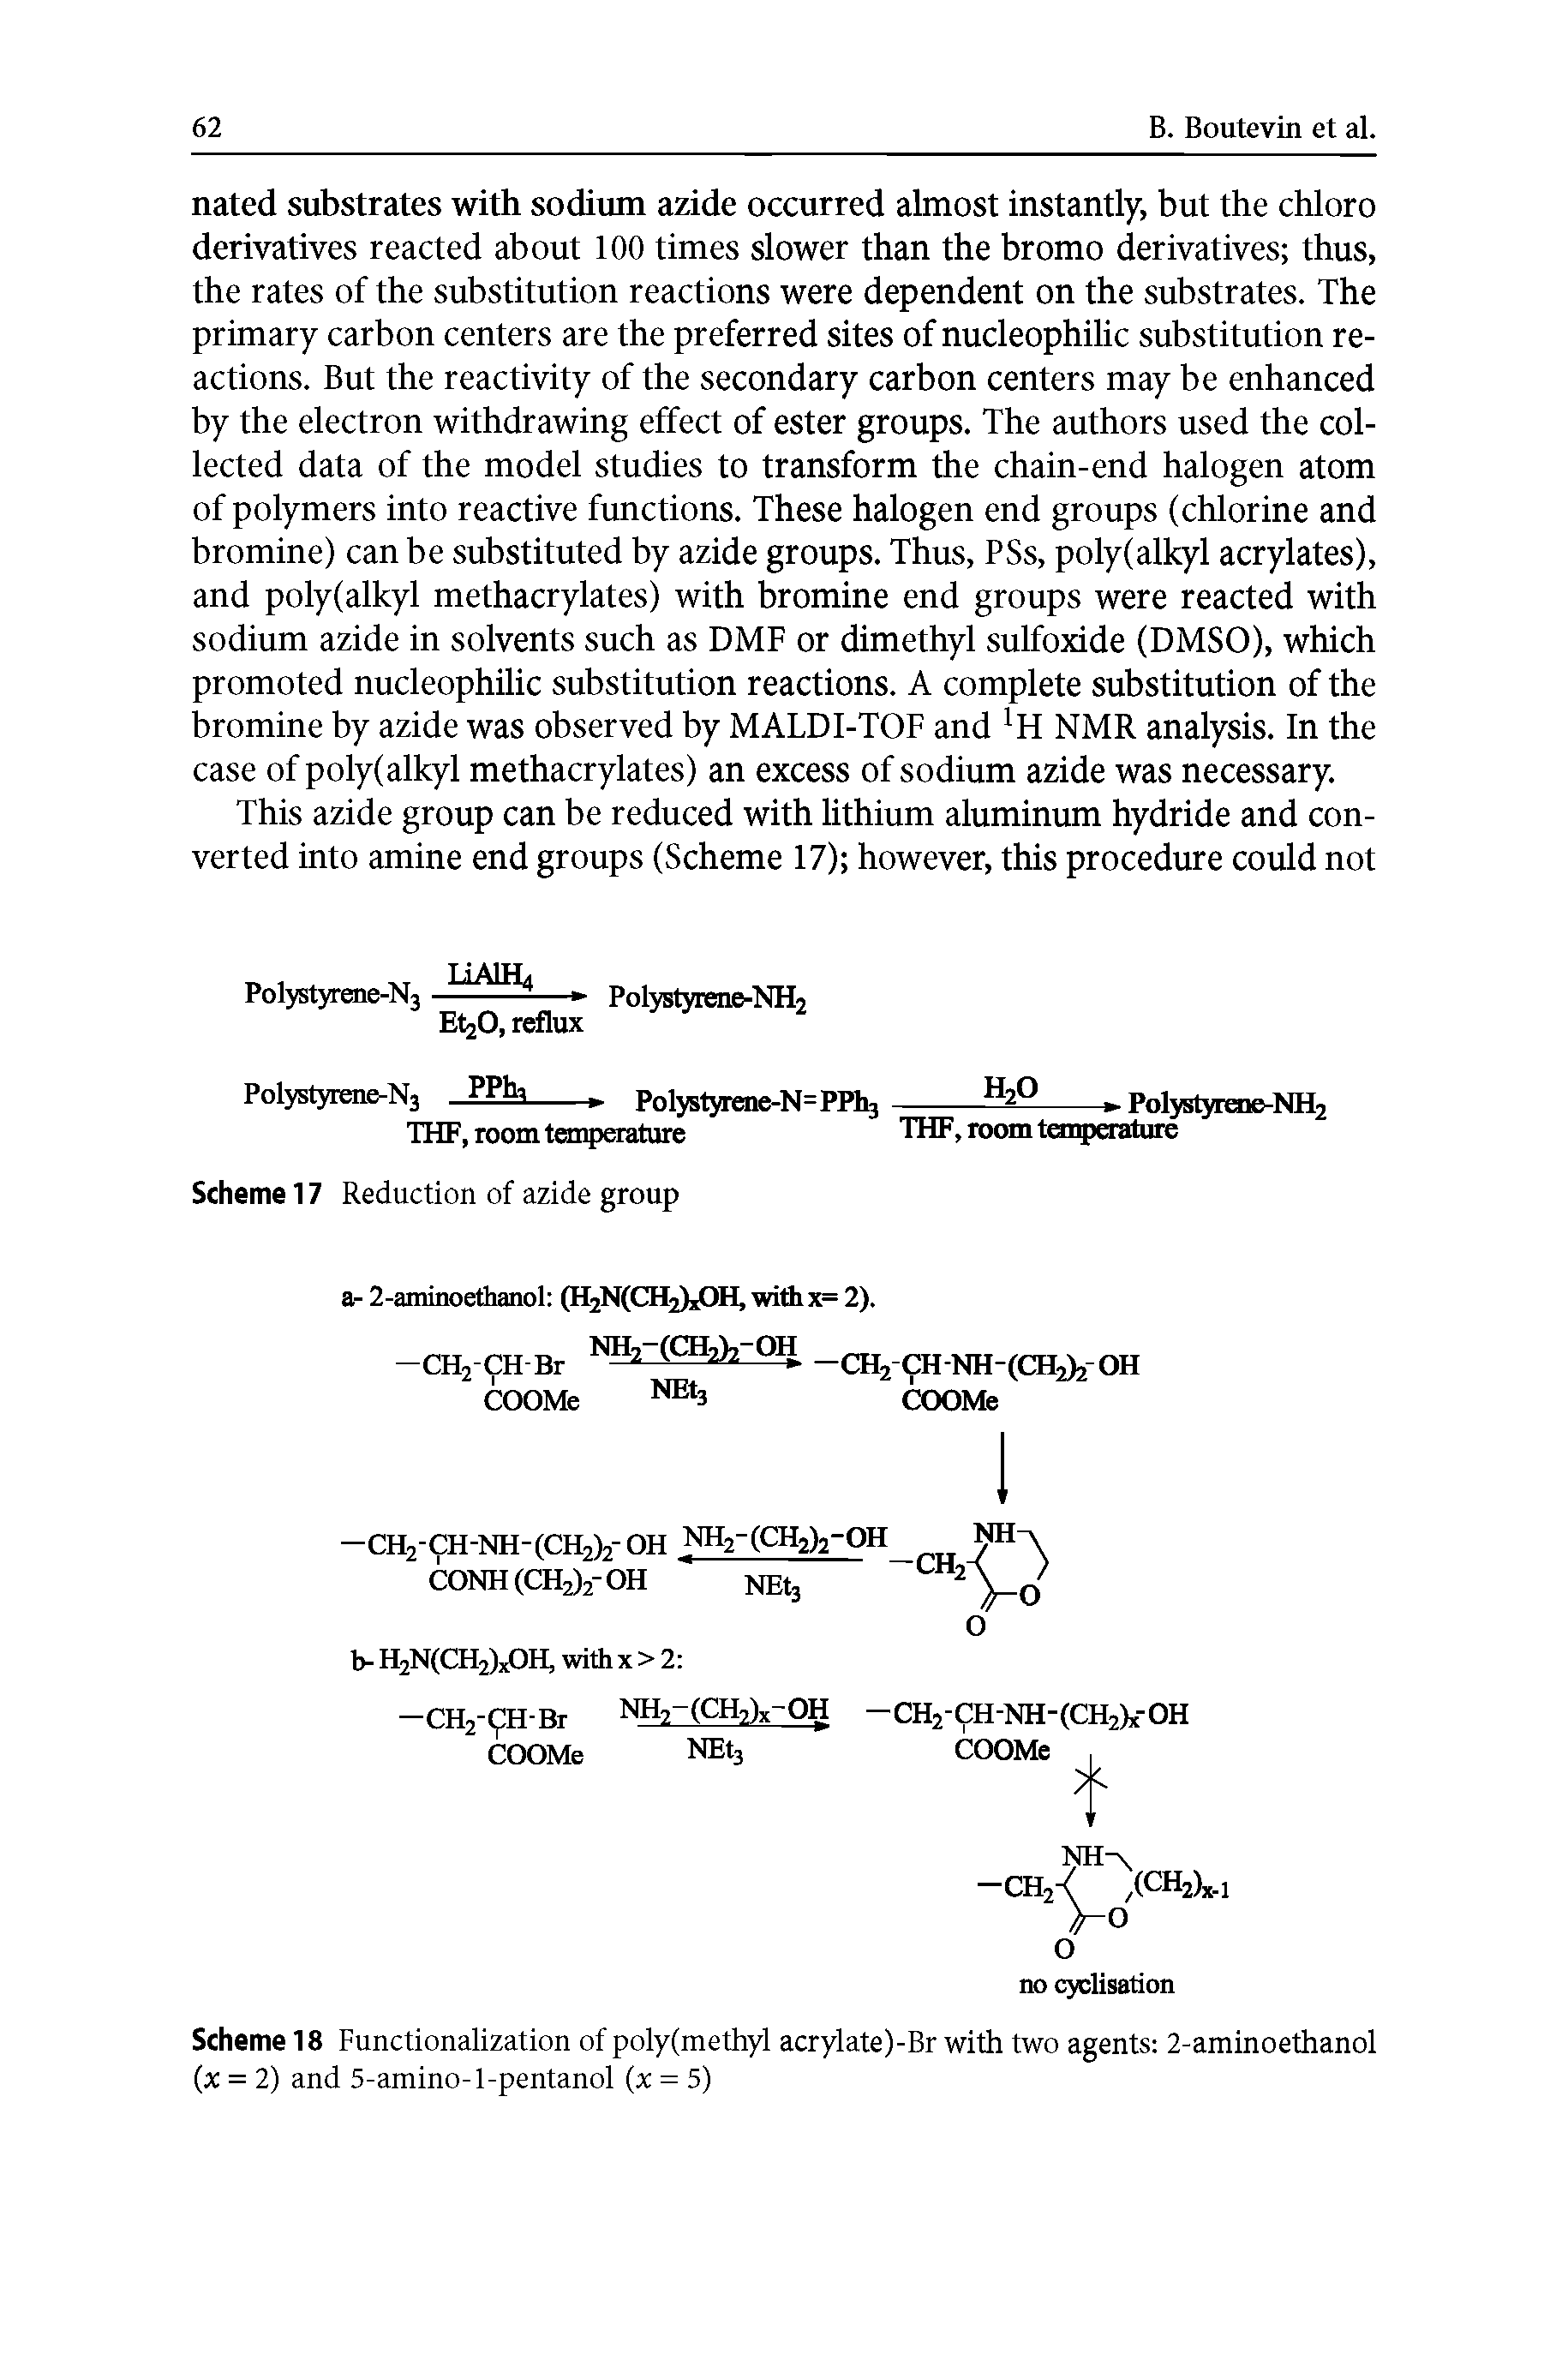 Scheme 18 Functionalization of poly(methyl acrylate)-Br with two agents 2-aminoethanol (x = 2) and 5-amino-1-pentanol (x = 5)...